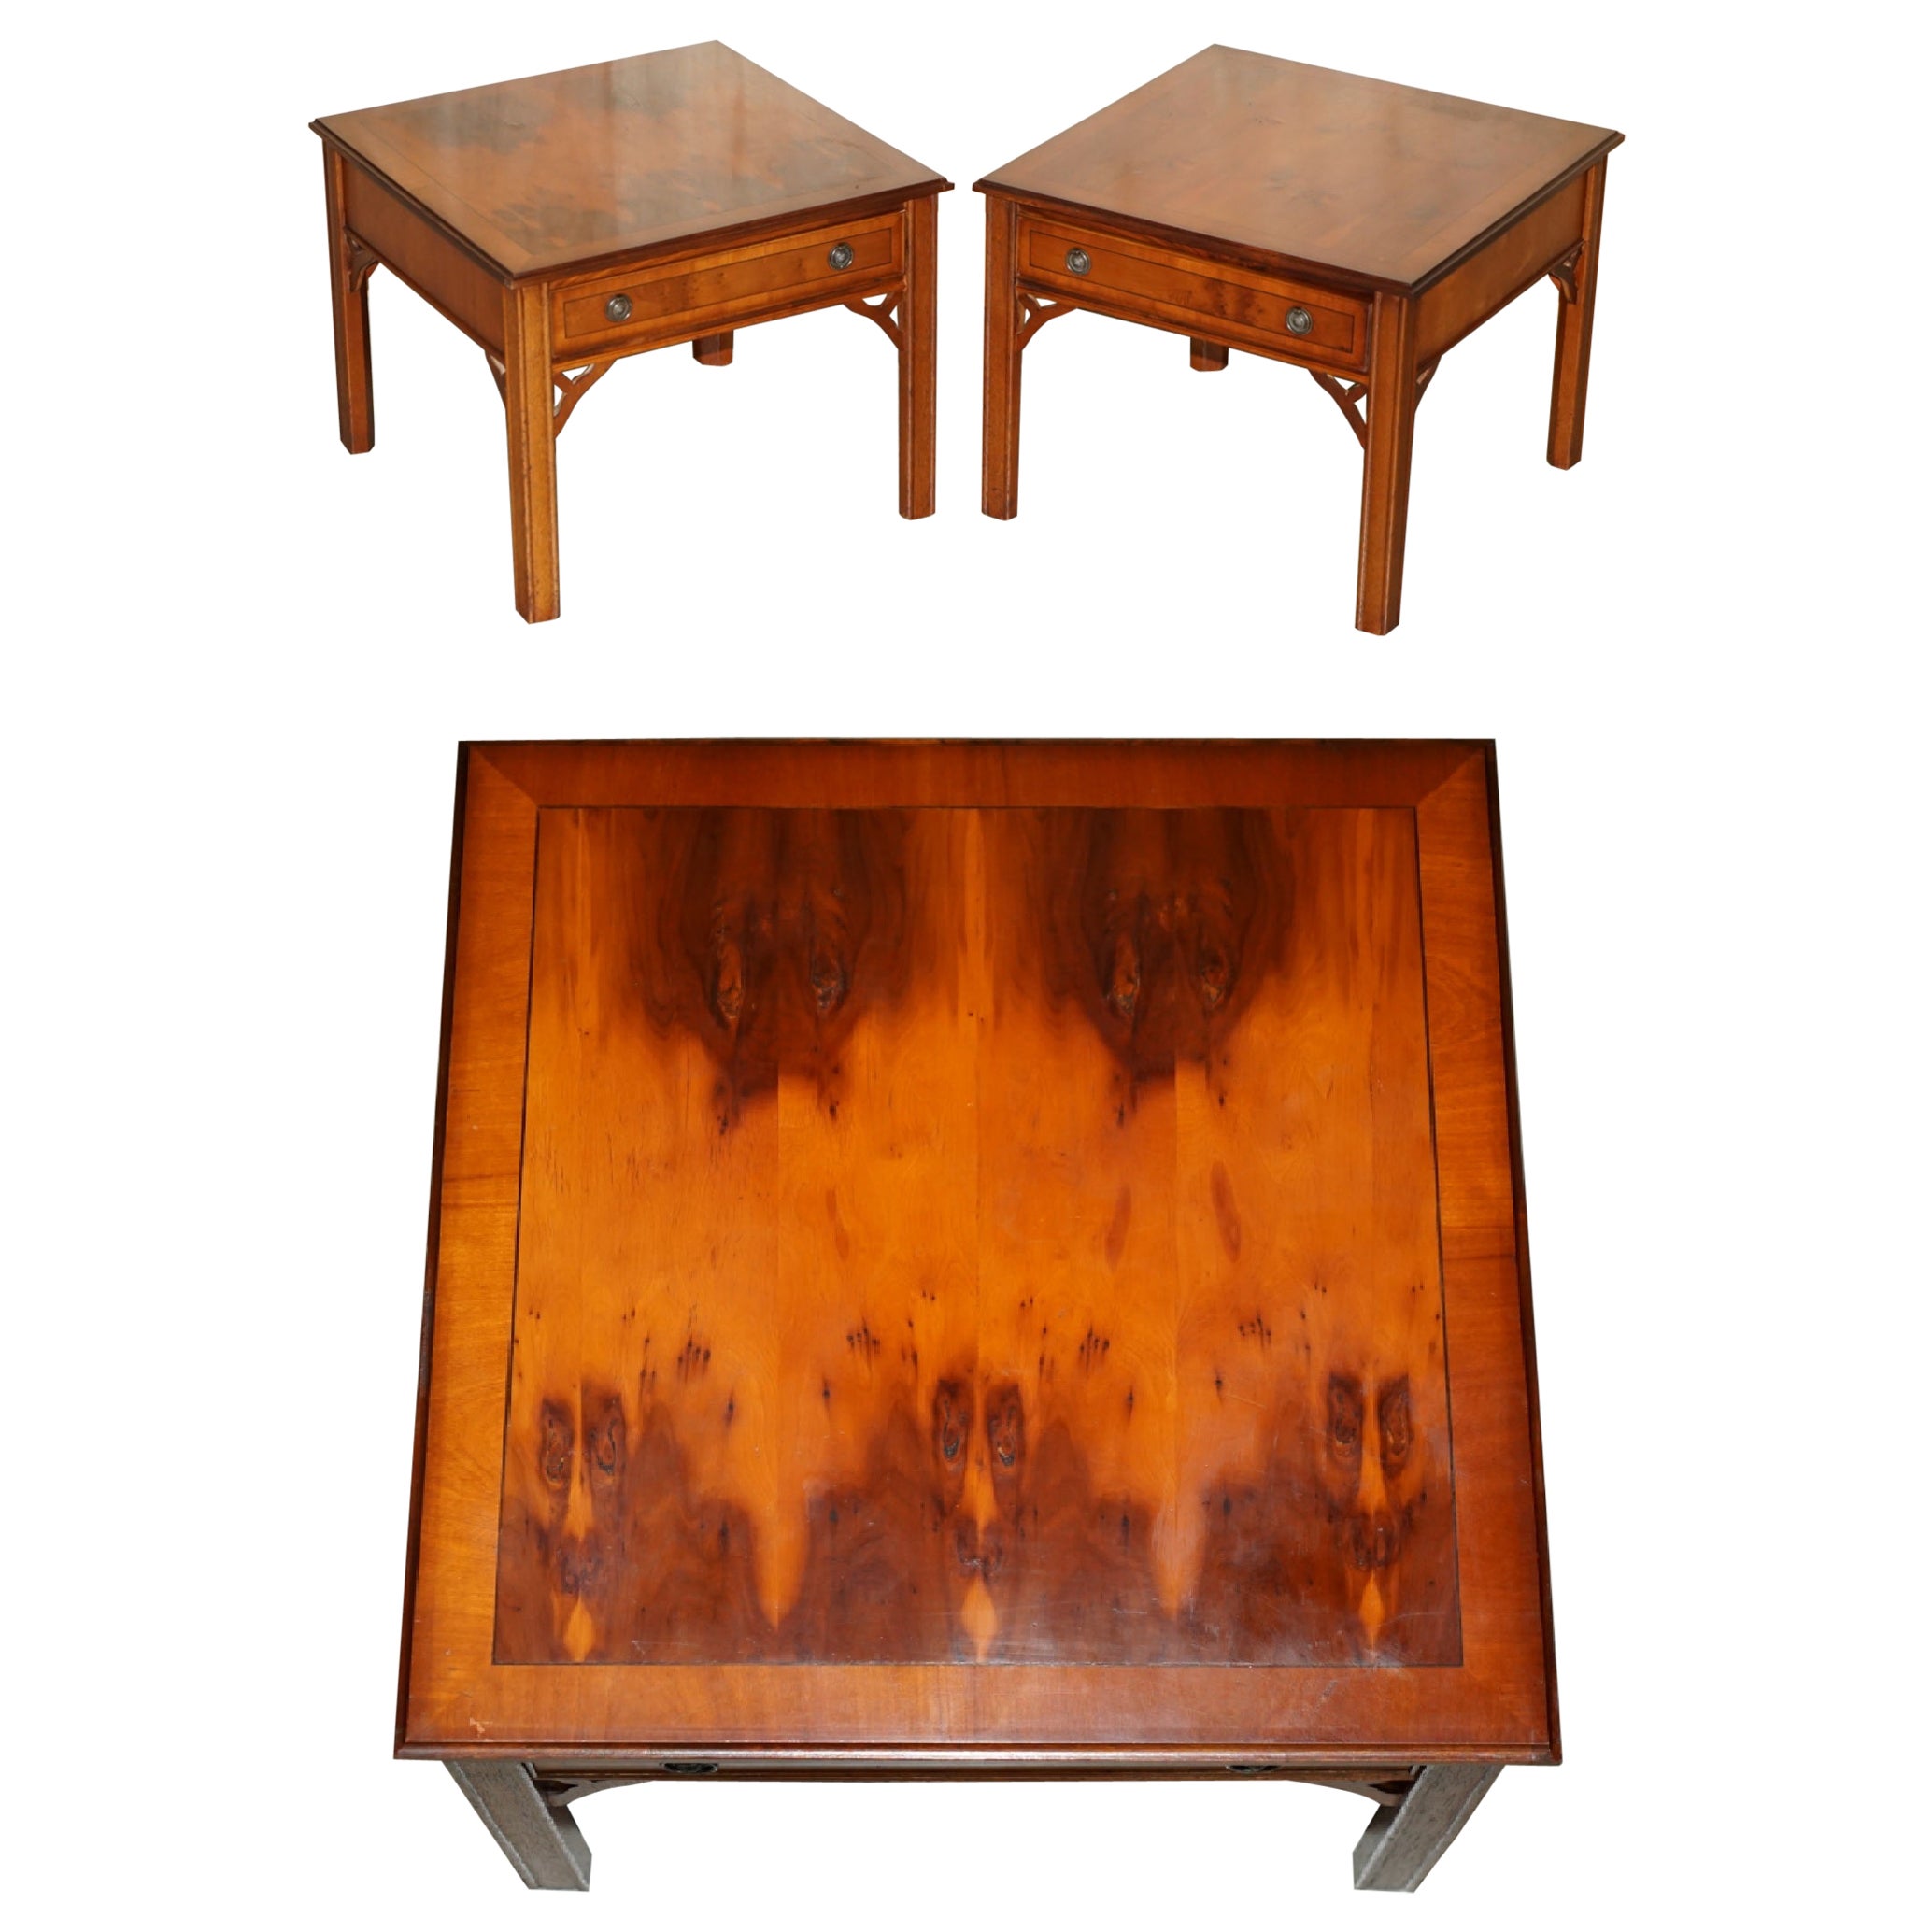 LOVELY PAIR OF BURR YEW WOOD SiDE END LAMP WINE TABLES MIT LARGE SINGLE DRAWERS